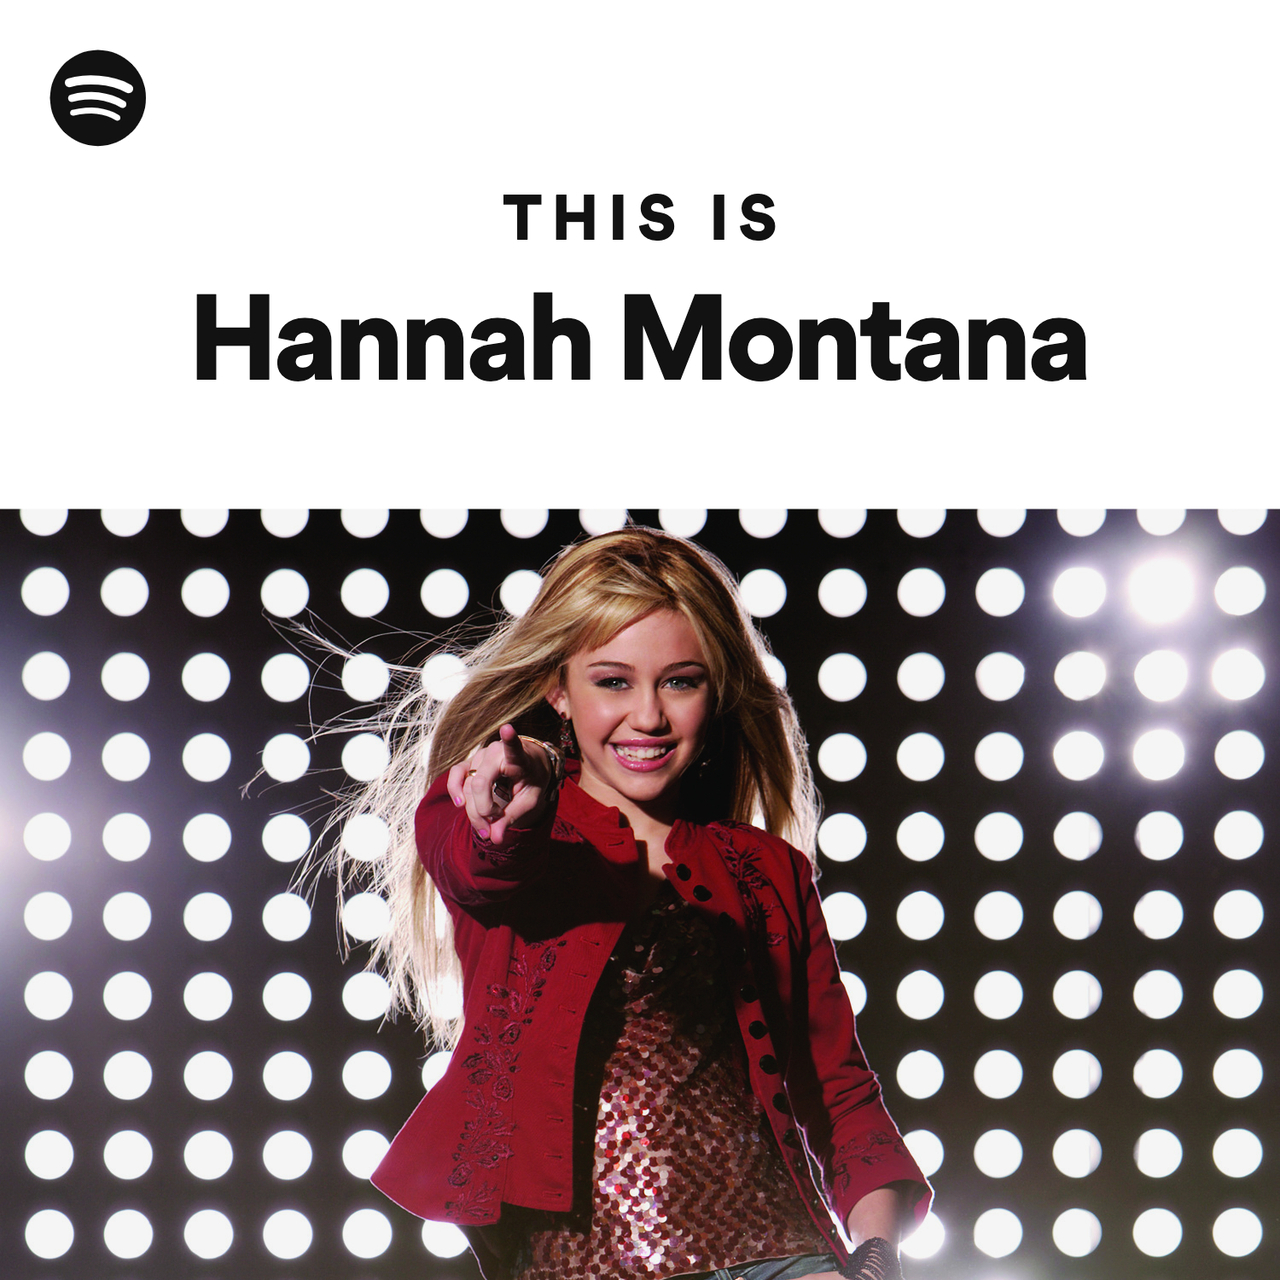 This Is Hannah Montana by spotify Spotify Playlist